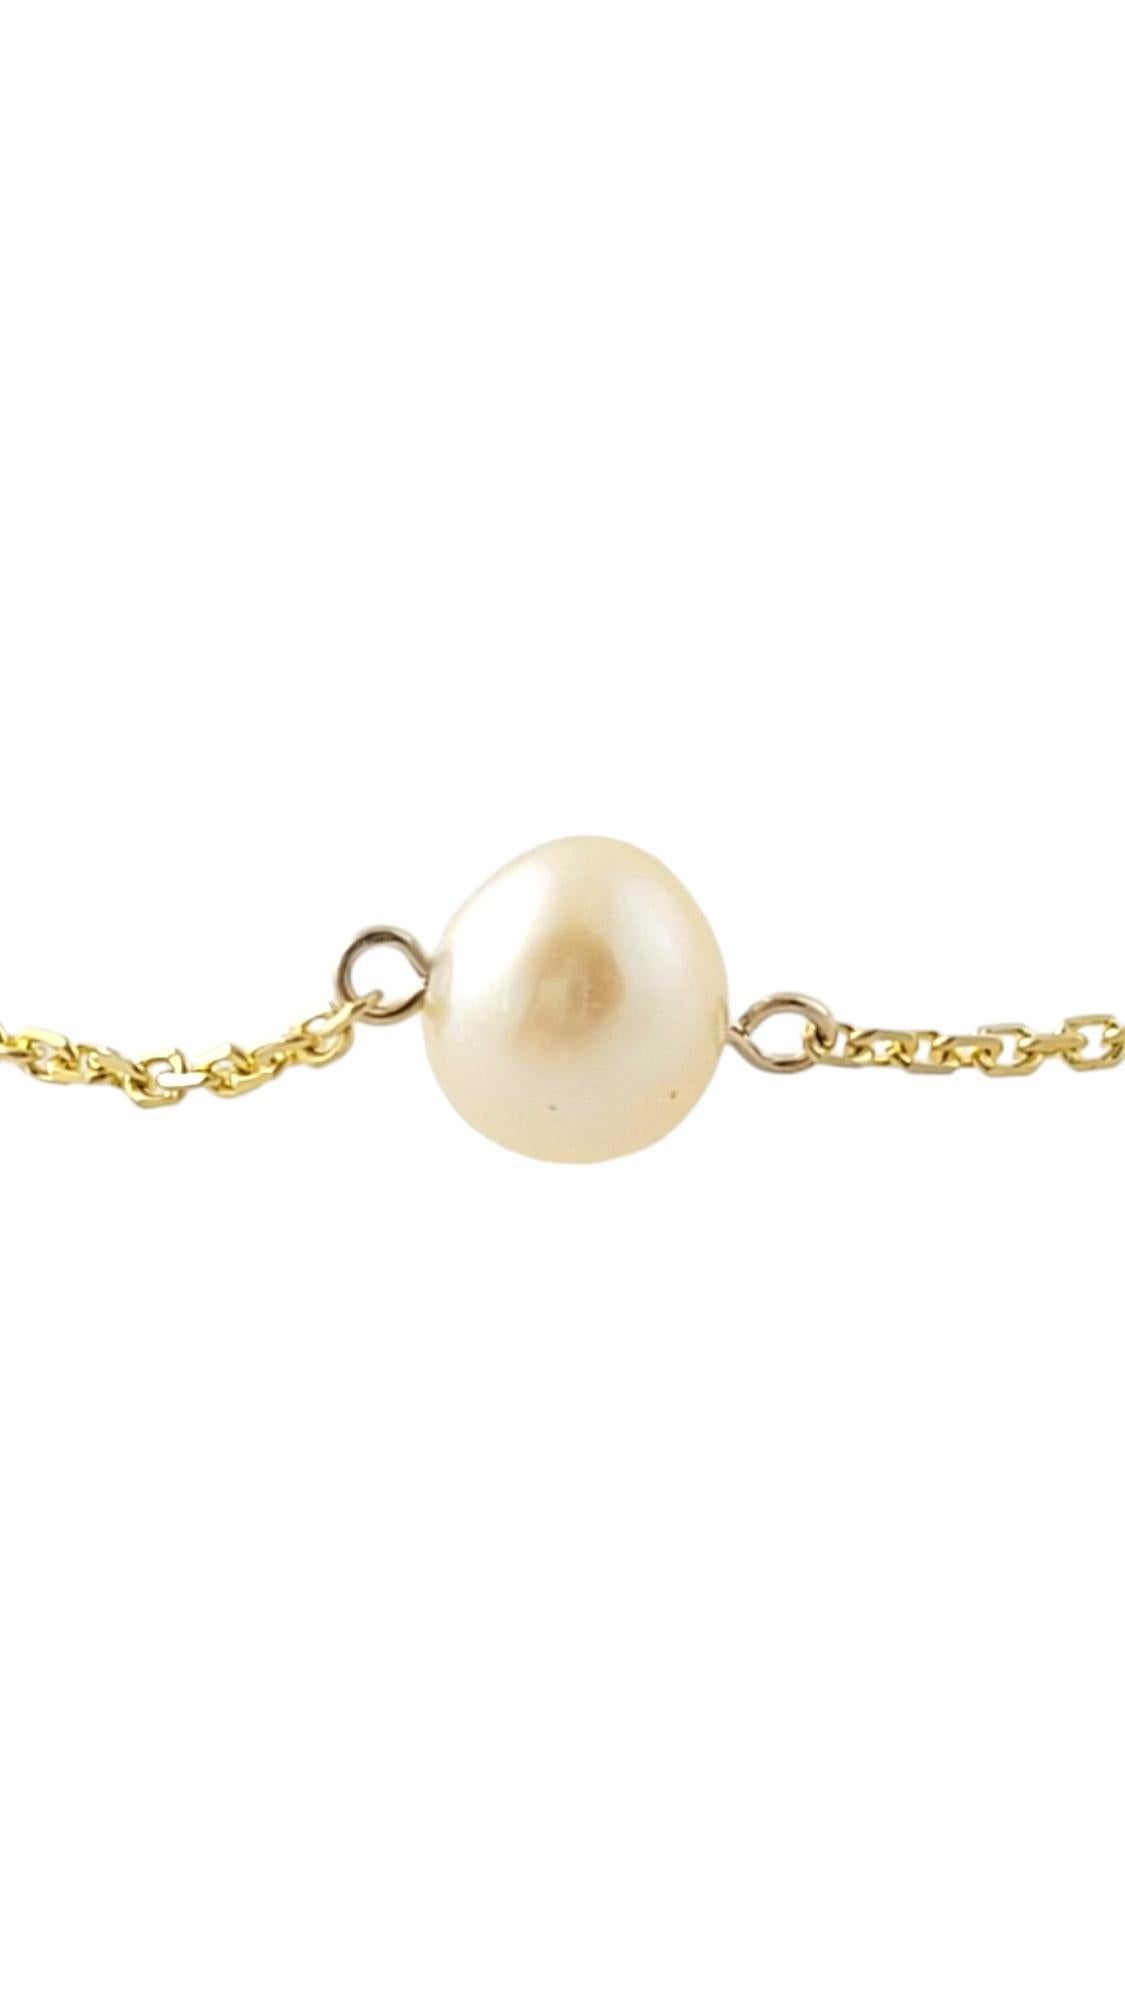 14K Yellow Gold Pearl Chain Necklace #16877

This breathtaking 14K gold chain necklace features 11 beautiful pearls!

Chain length: 16